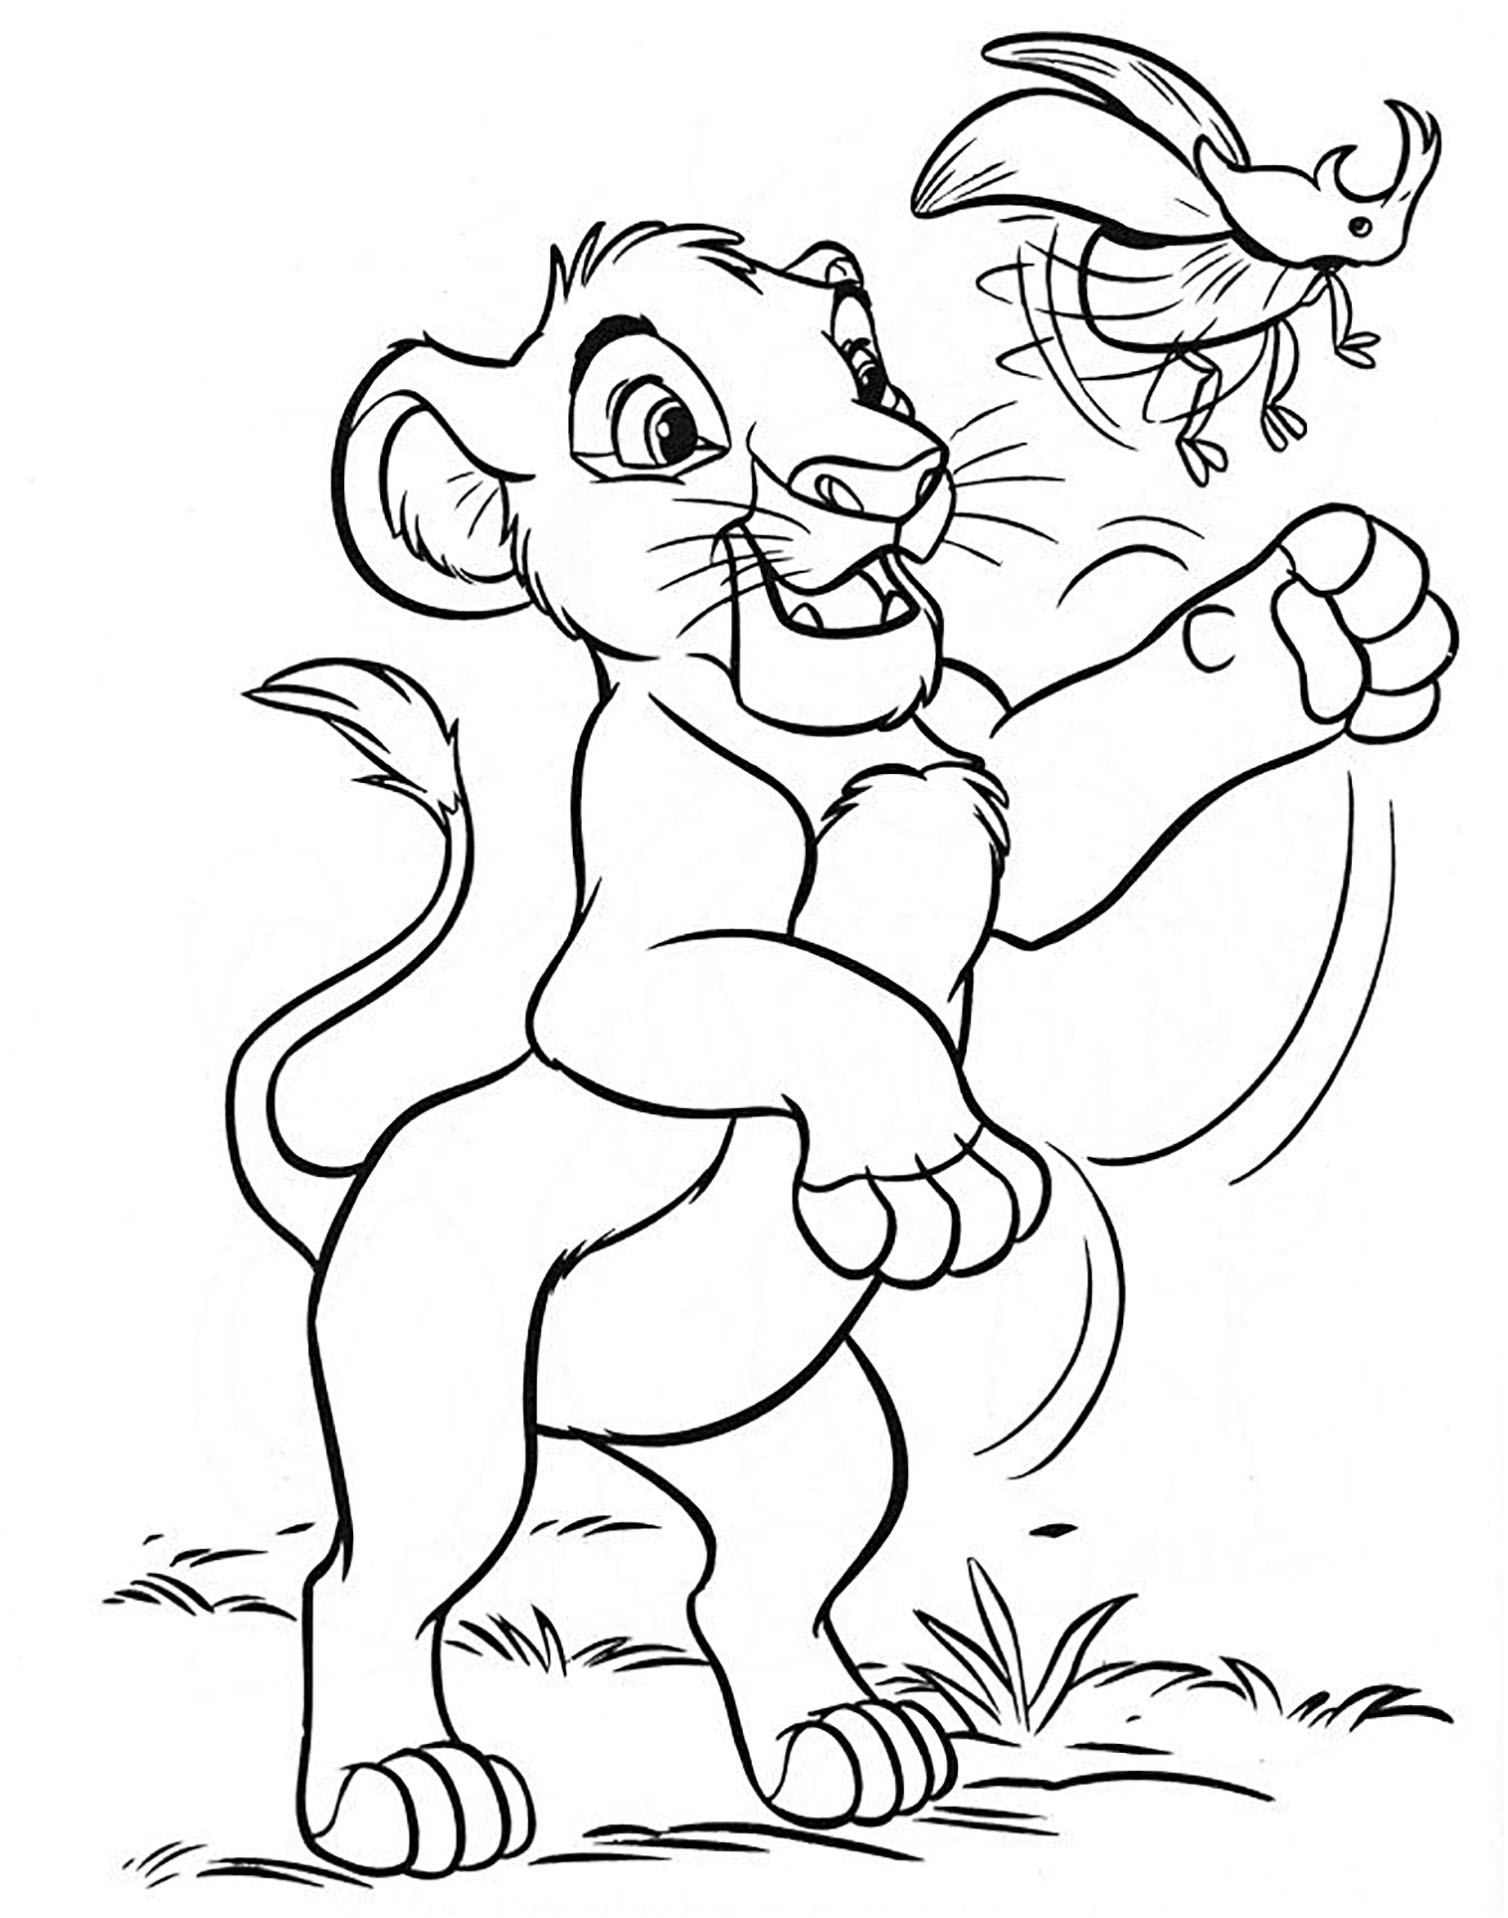 Simba the young Lion King - The Lion King Kids Coloring Pages